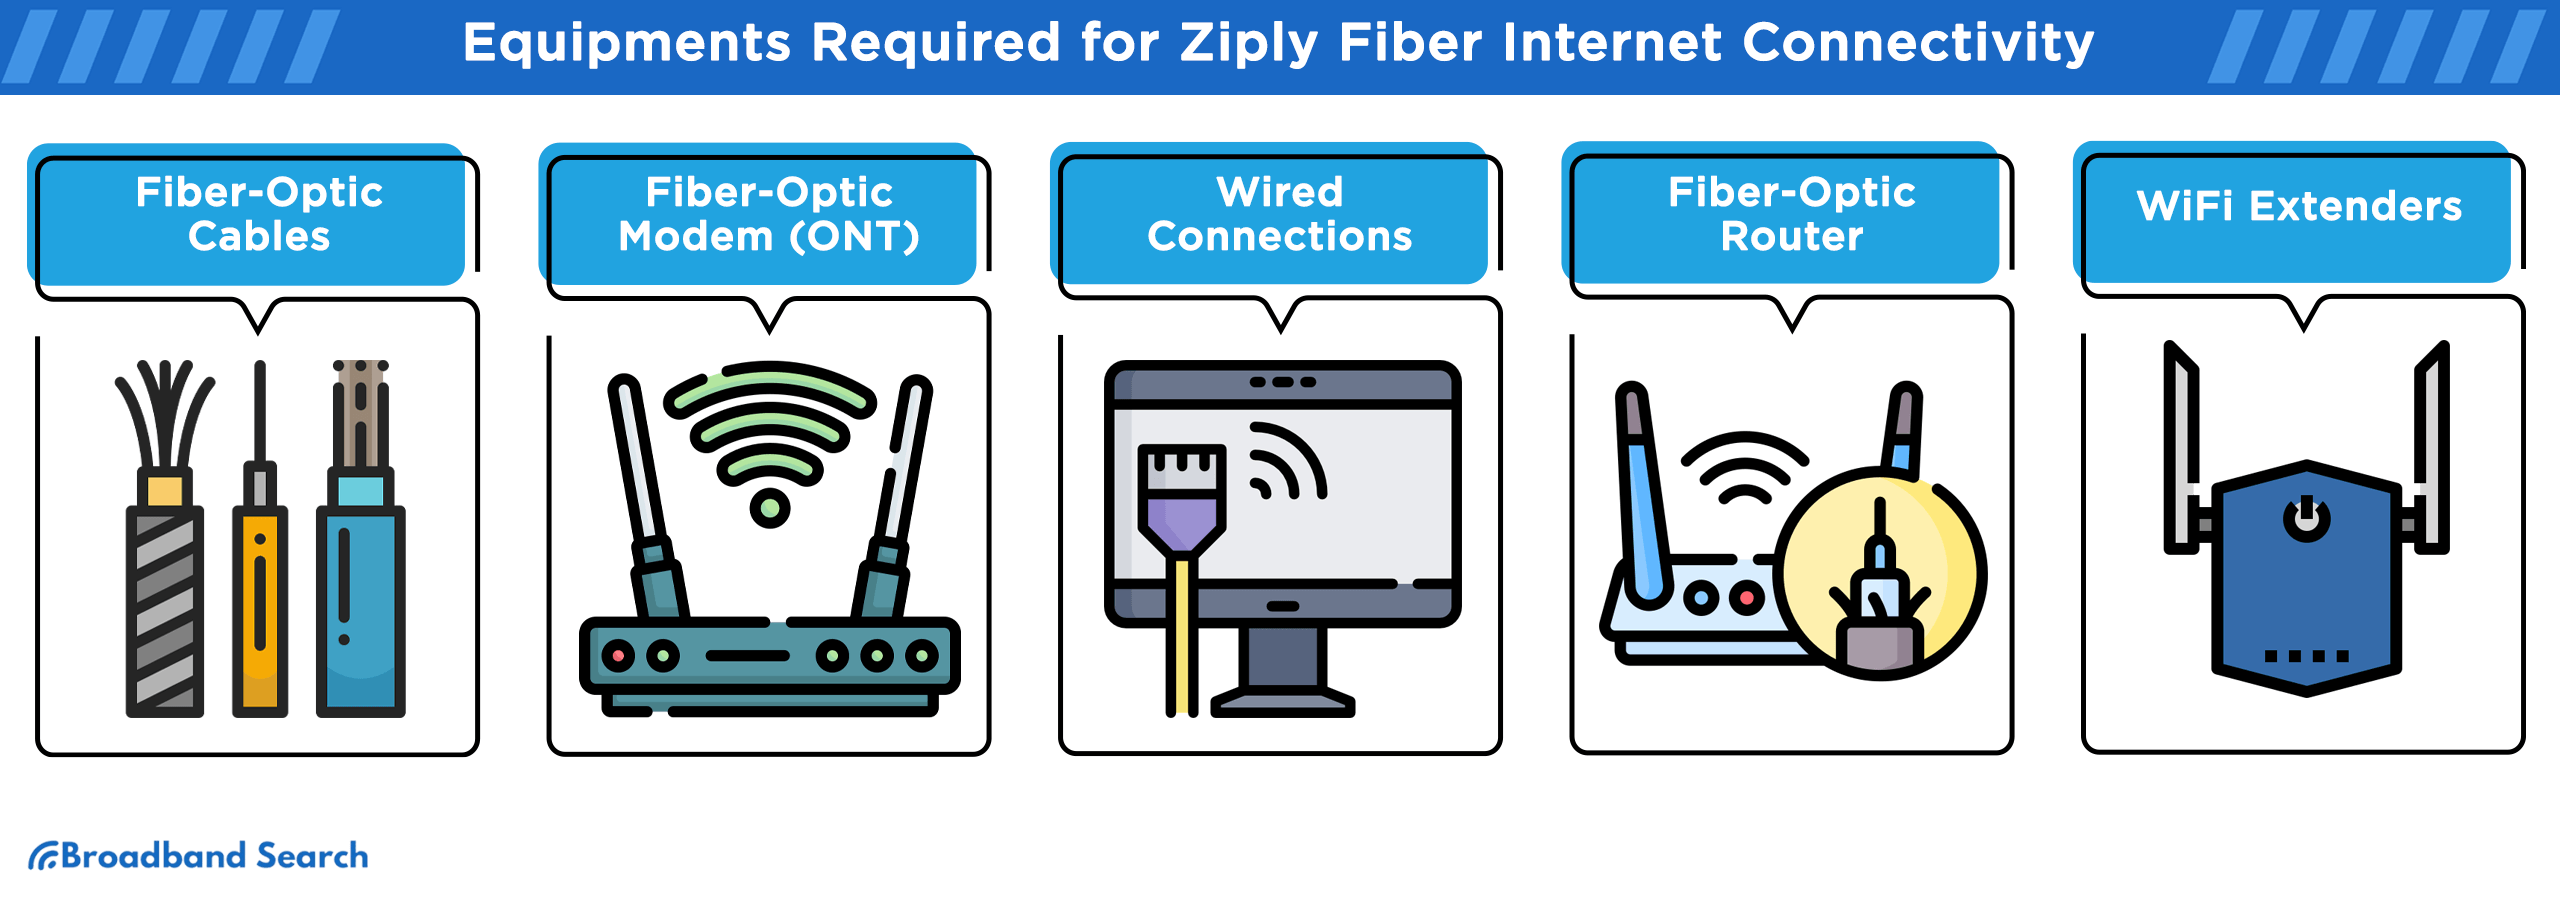 Equipments required for ziply fiber internet connectivity